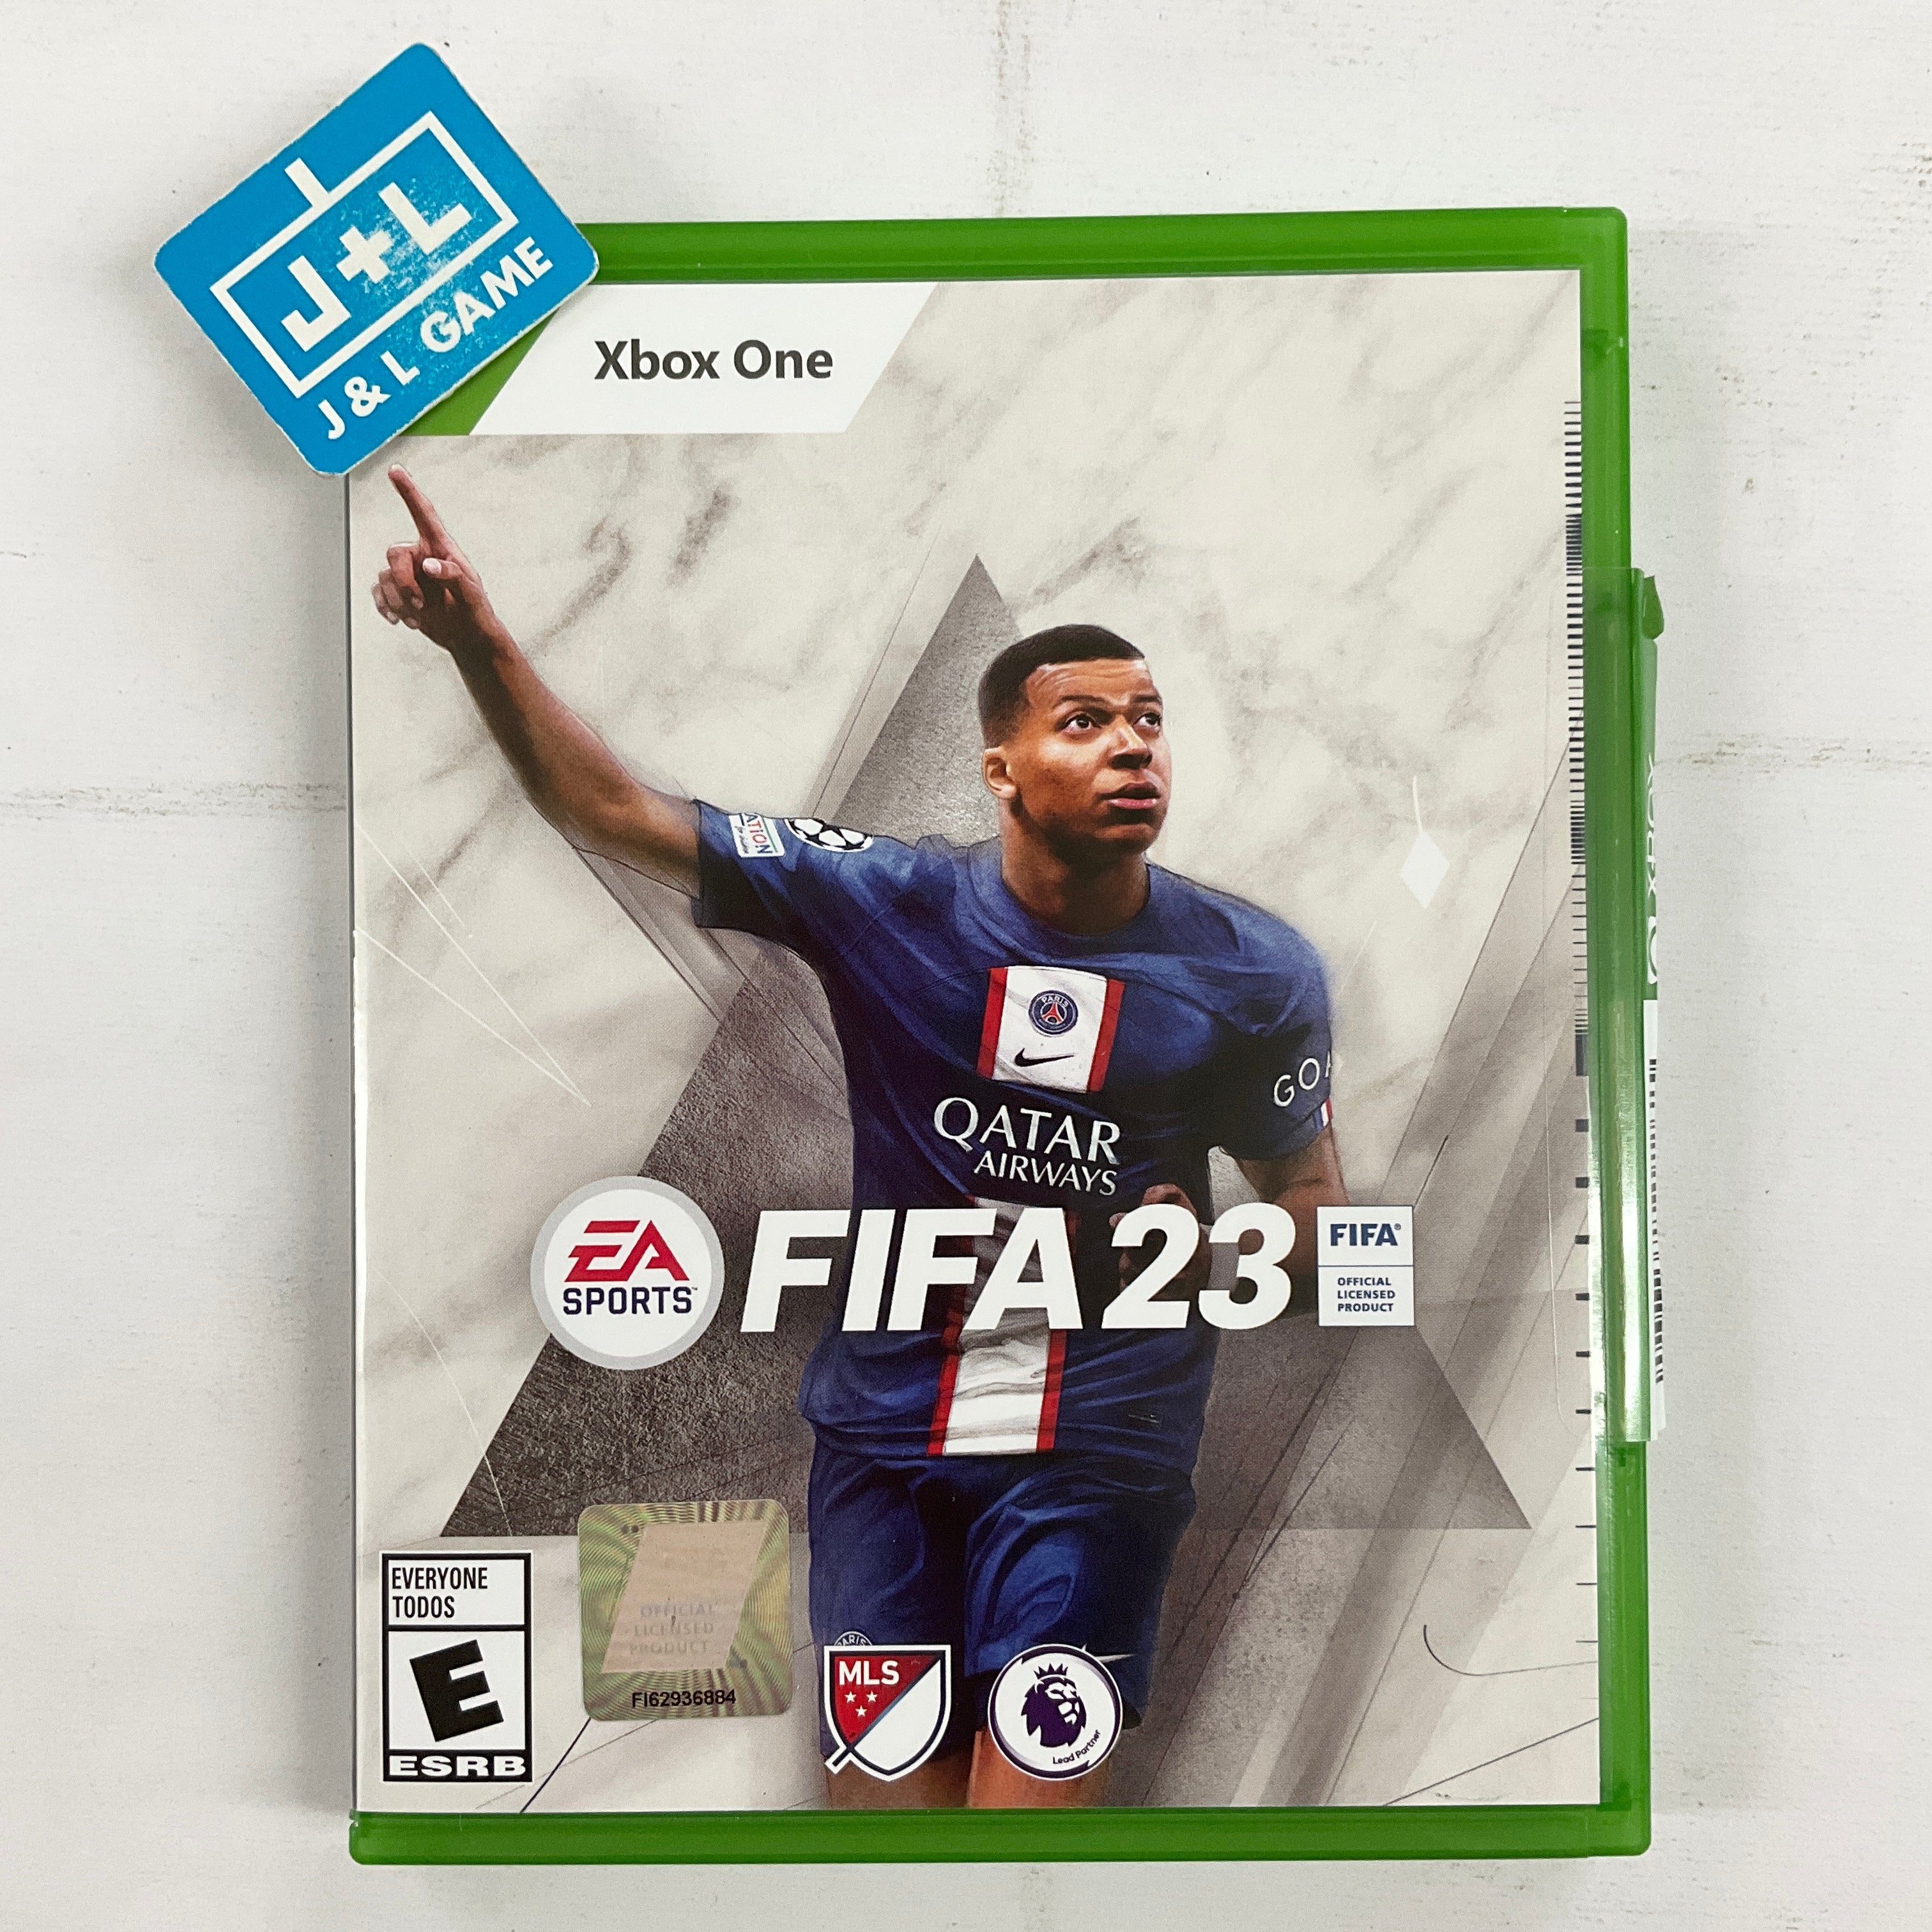 FIFA 23 - (XB1) Xbox One [UNBOXING] Video Games Electronic Arts   